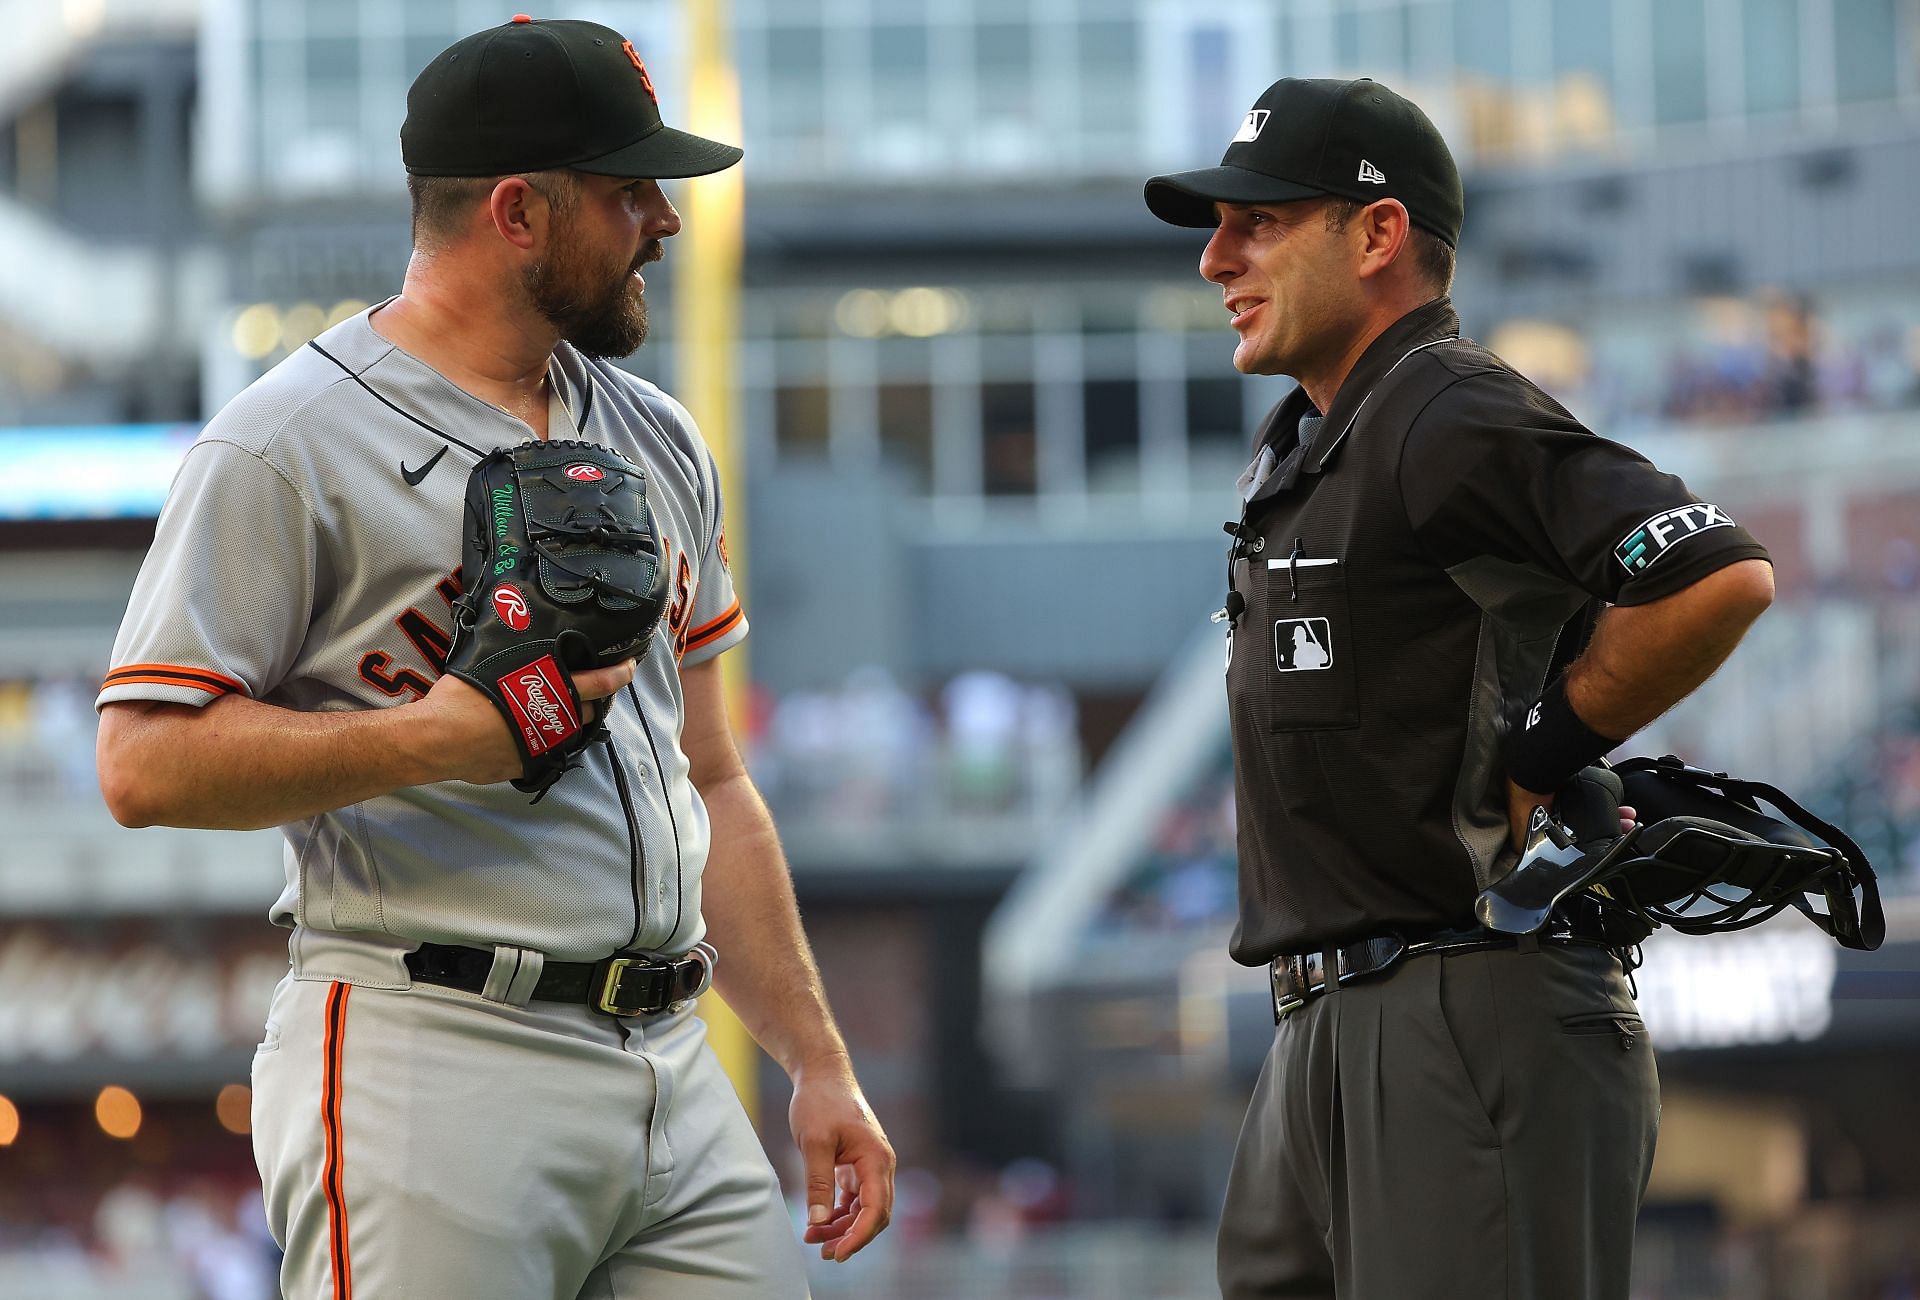 Carlos Rodon of the San Francisco Giants converses with homeplate umpire Pat Hoberg